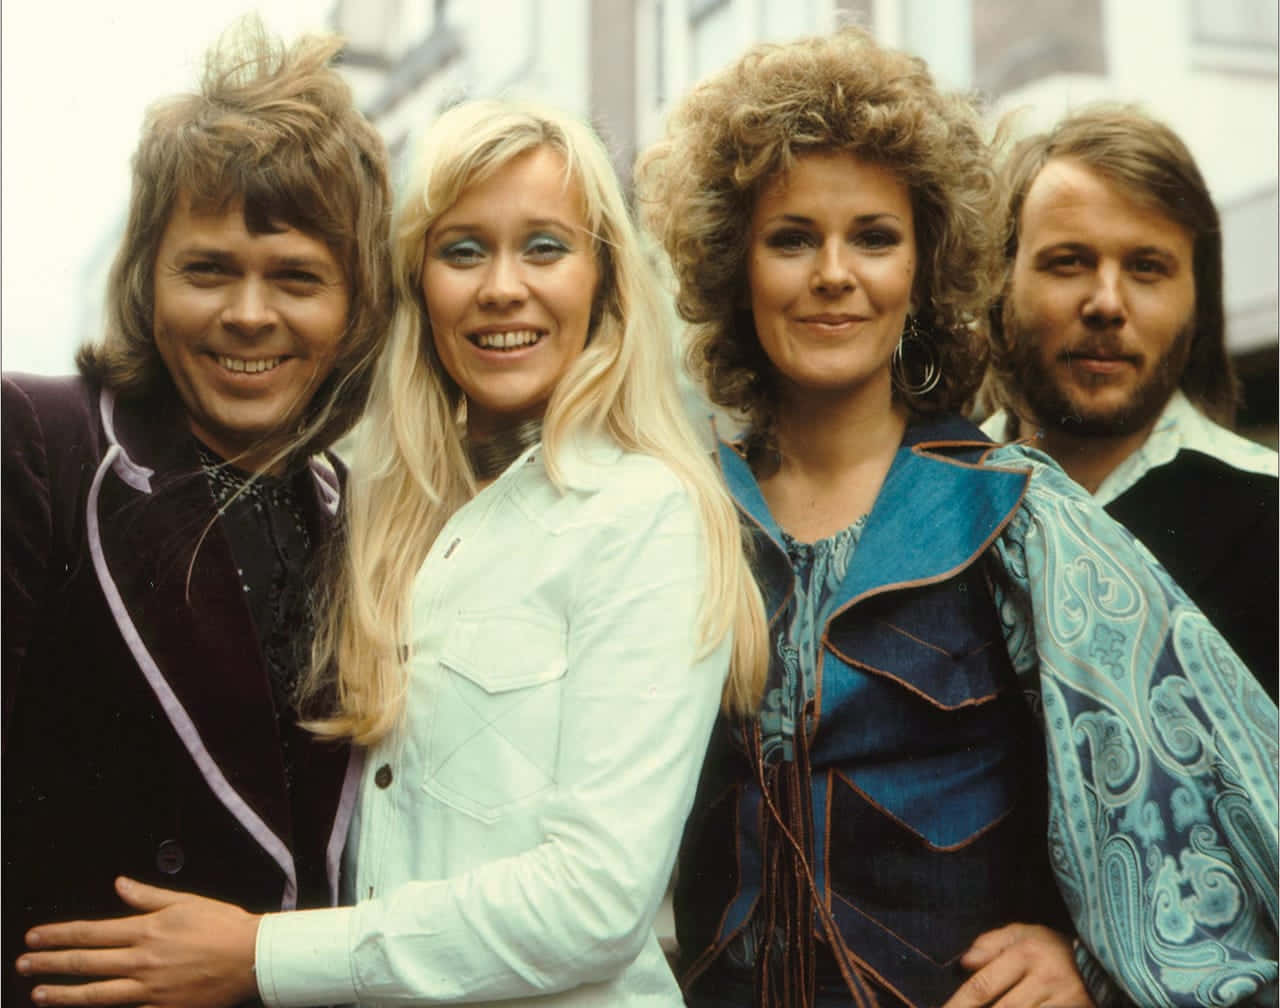 Abba performing live